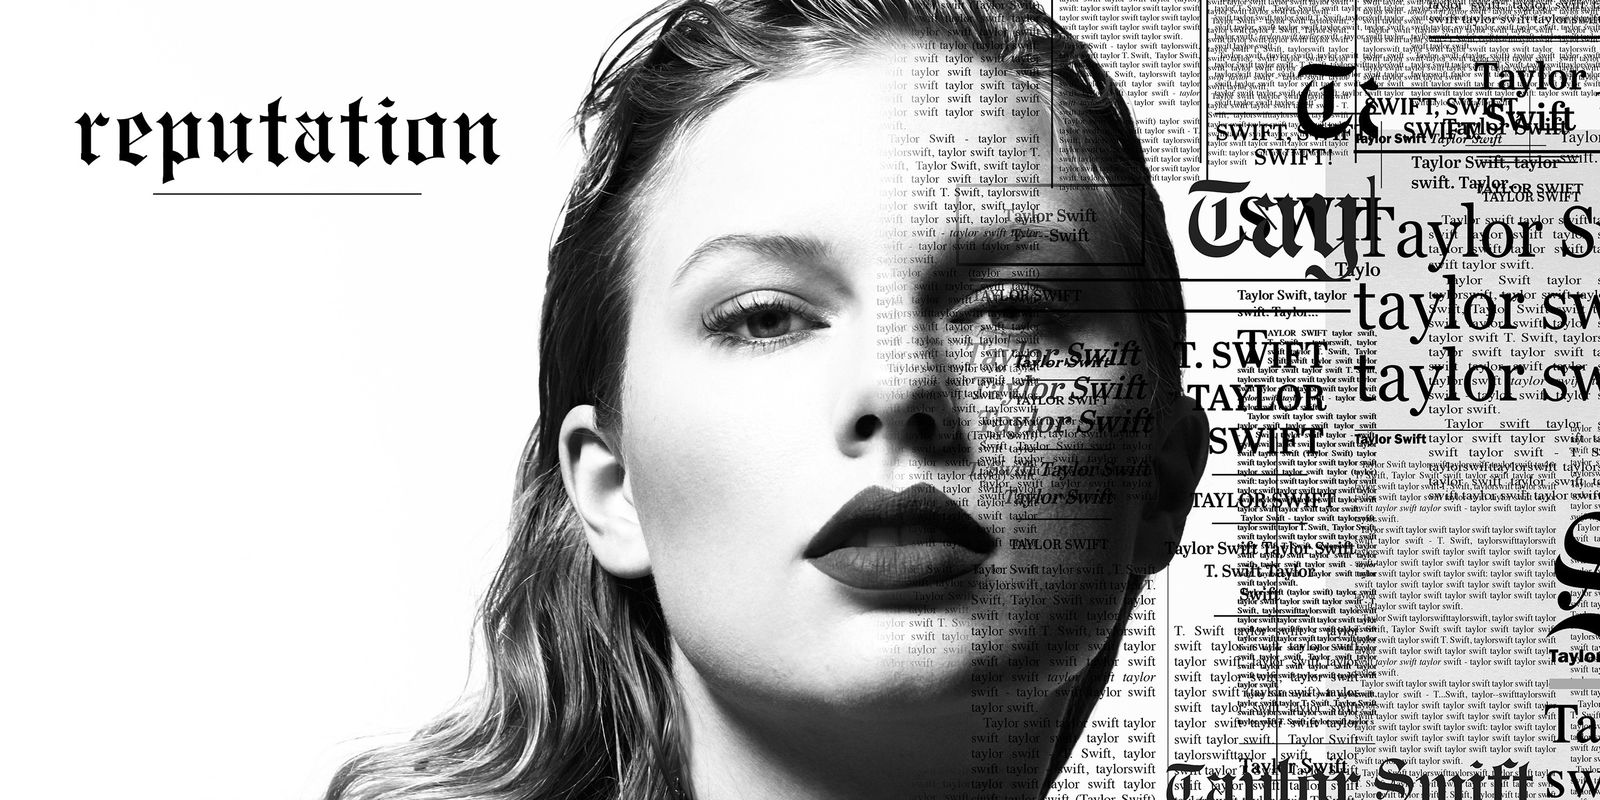 Taylor Swift’s forthcoming album won’t be available on streaming services for a full week